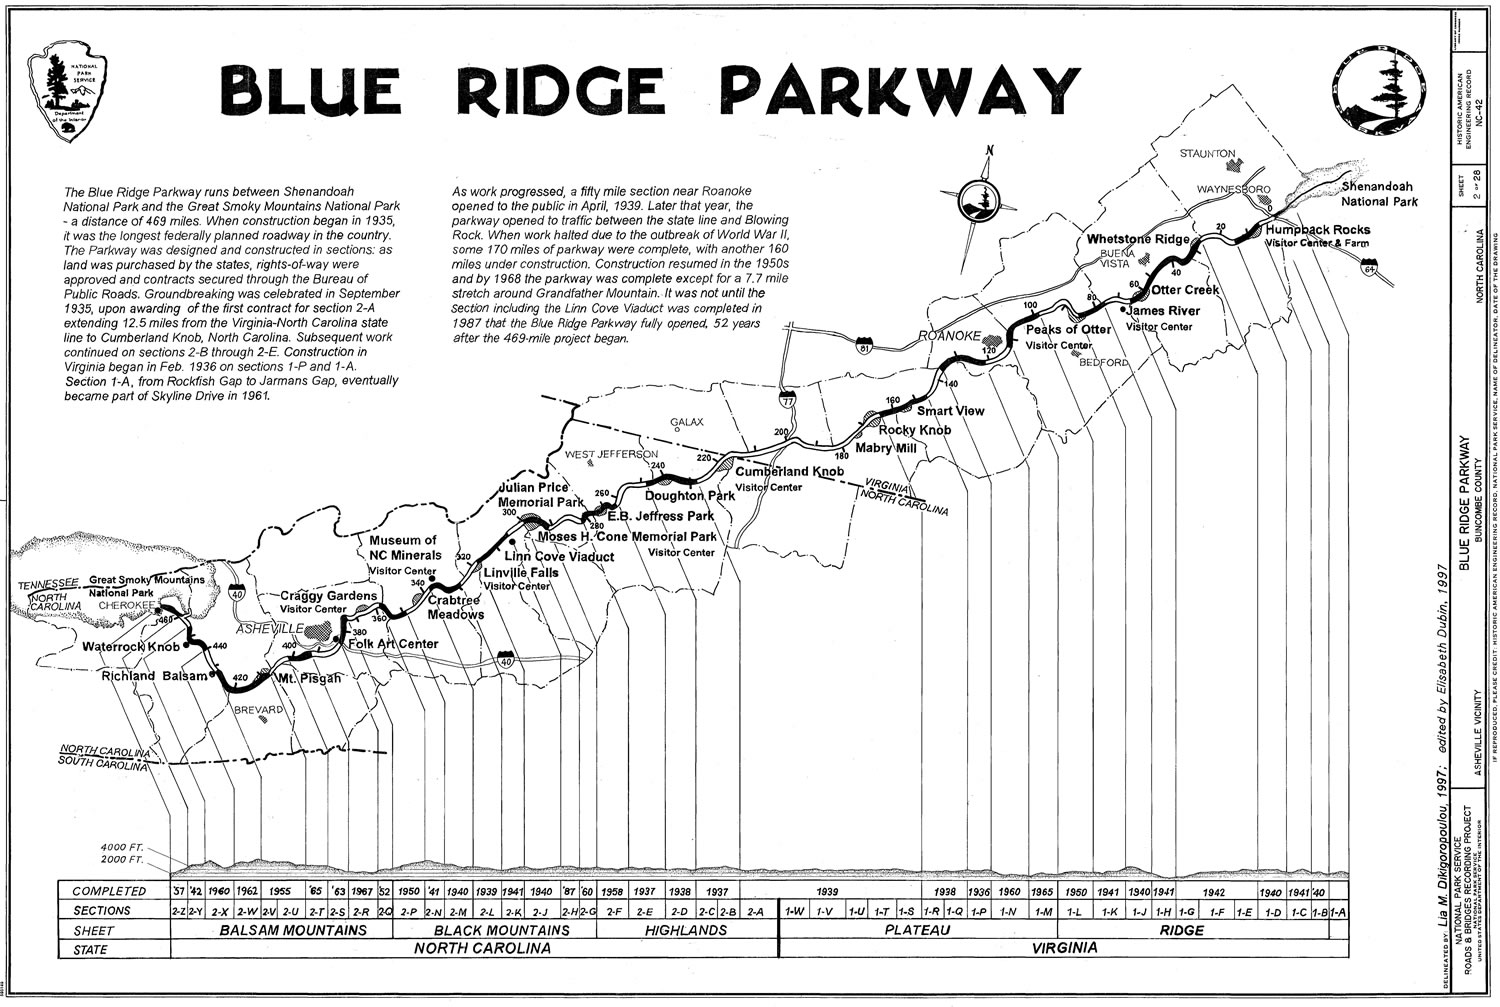 About The Blue Ridge Parkway